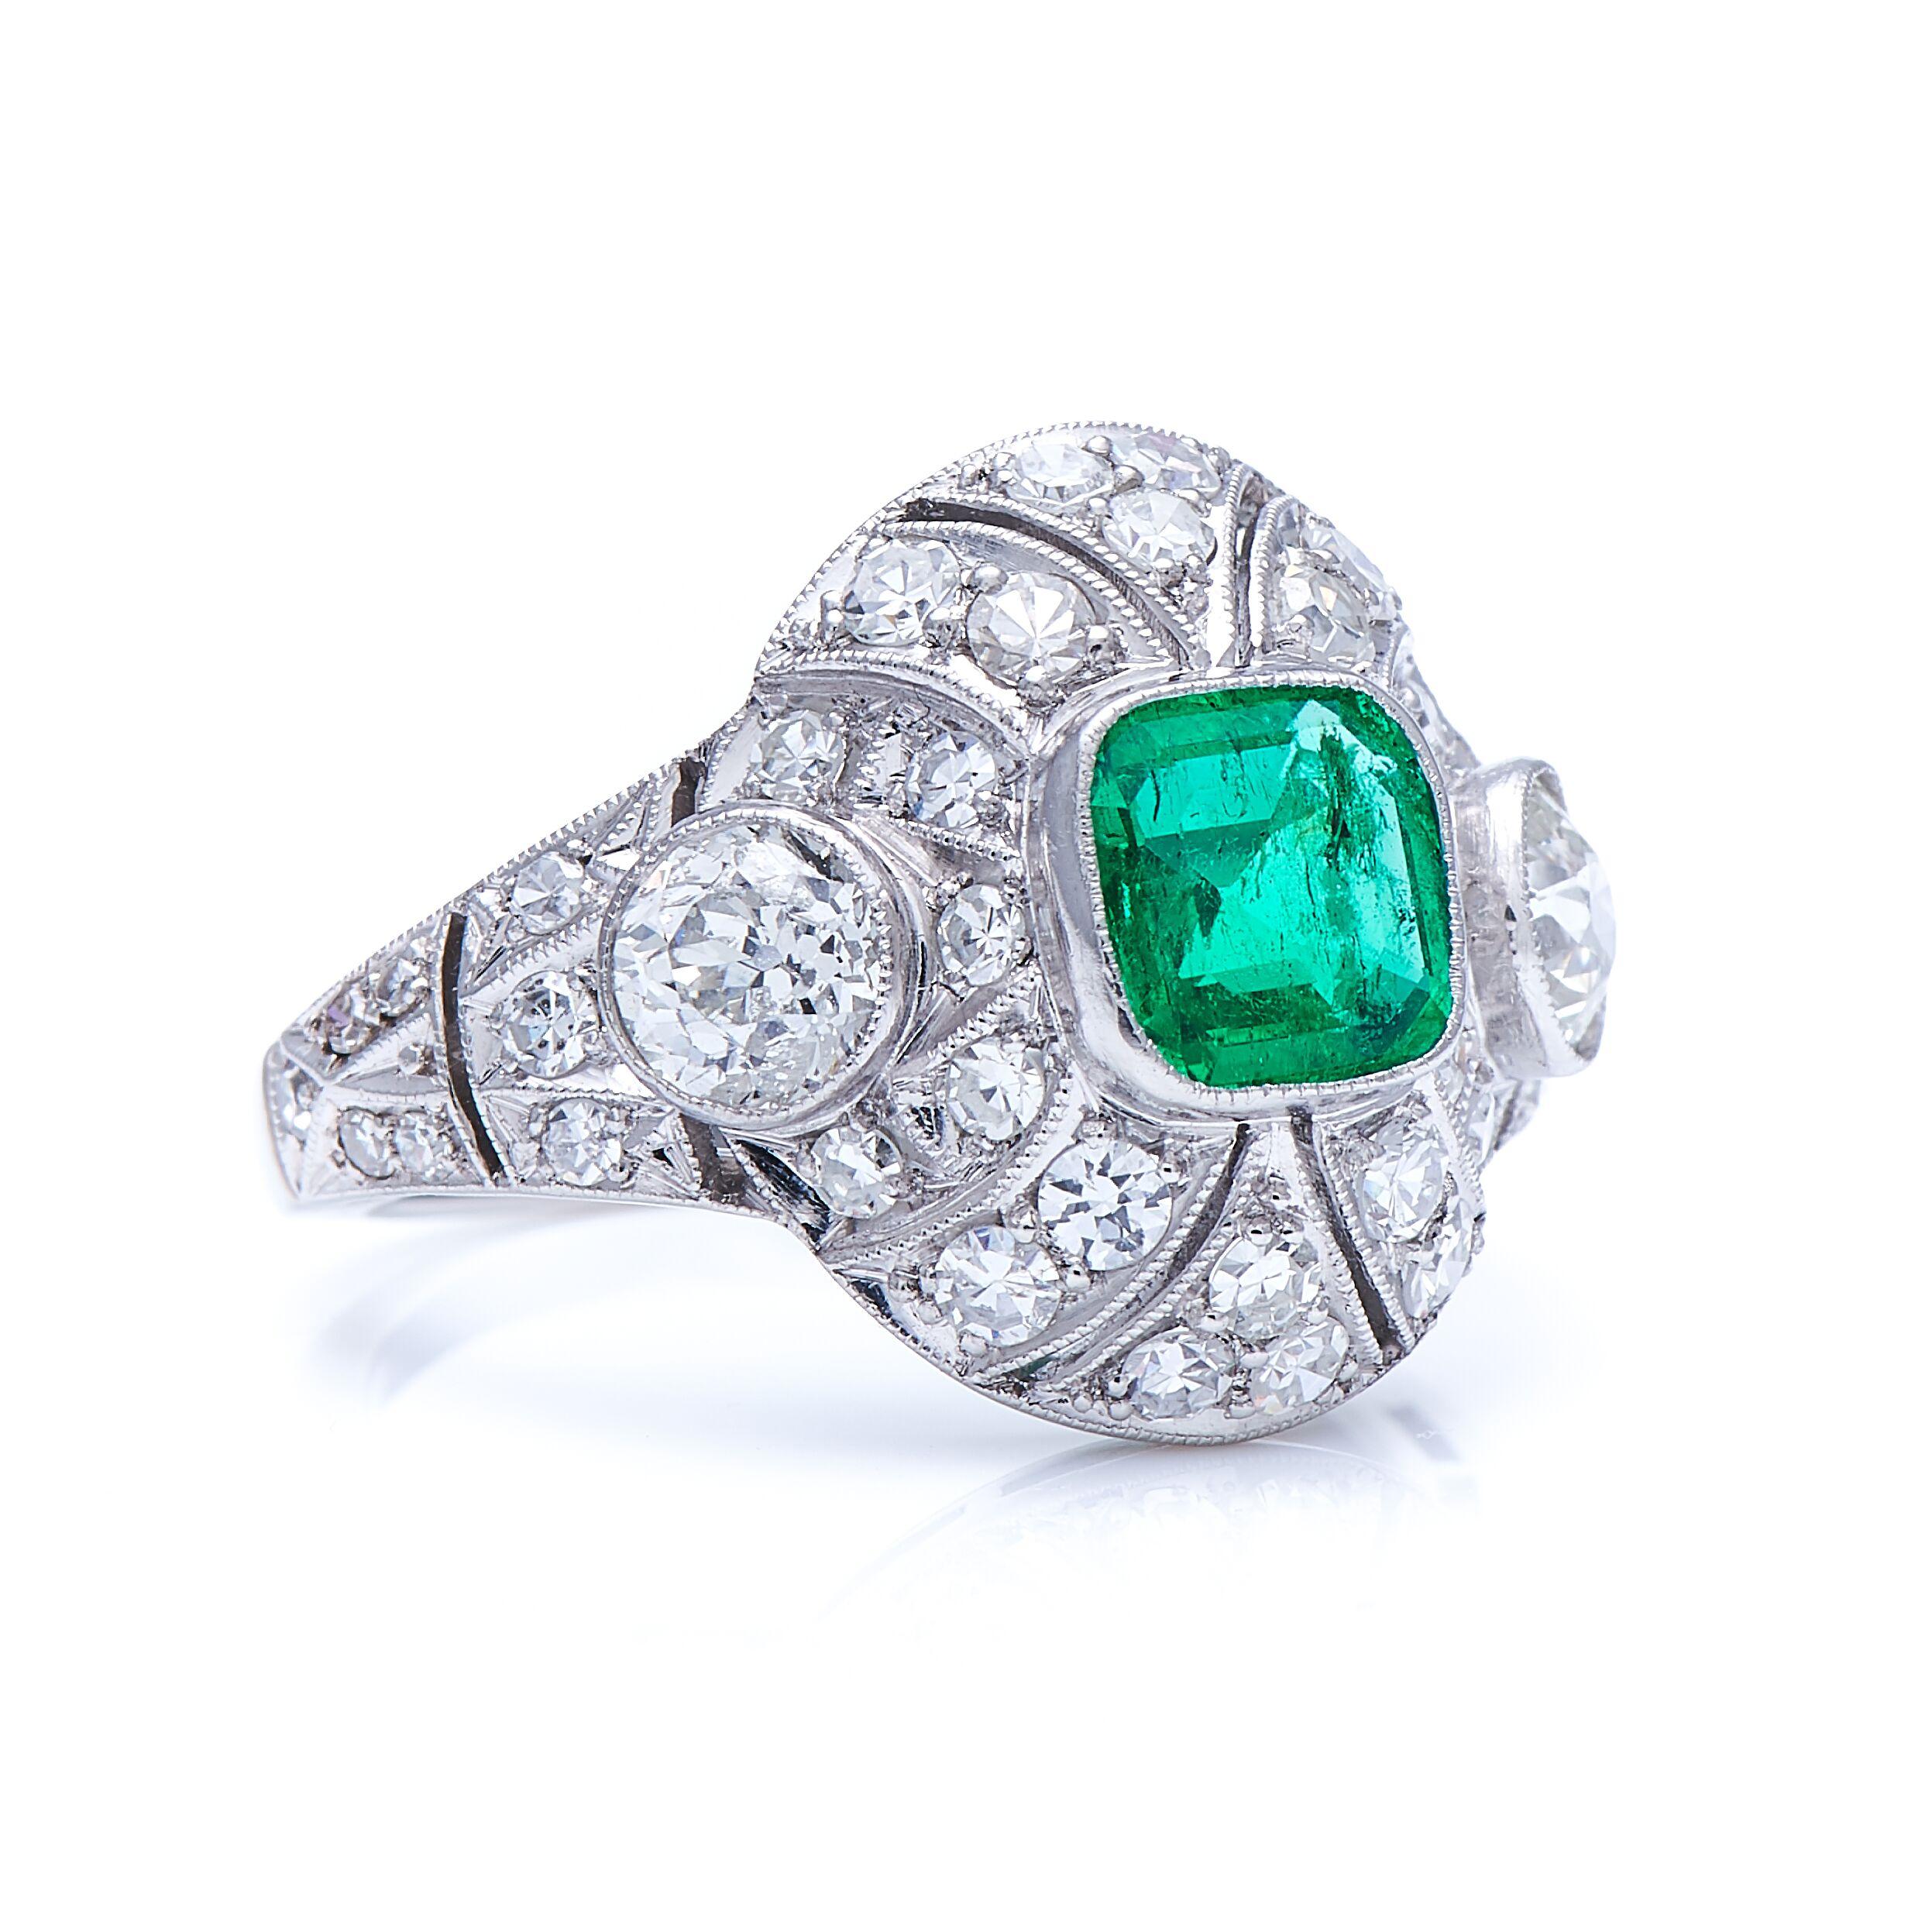 Emerald and diamond ring, circa 1925. The domed setting of this ring is hand pierced and set throughout with a variety of early circular-cut diamonds, and centres on a 0.9 carat step-cut Colombian emerald of a lush green hue, with excellent clarity,